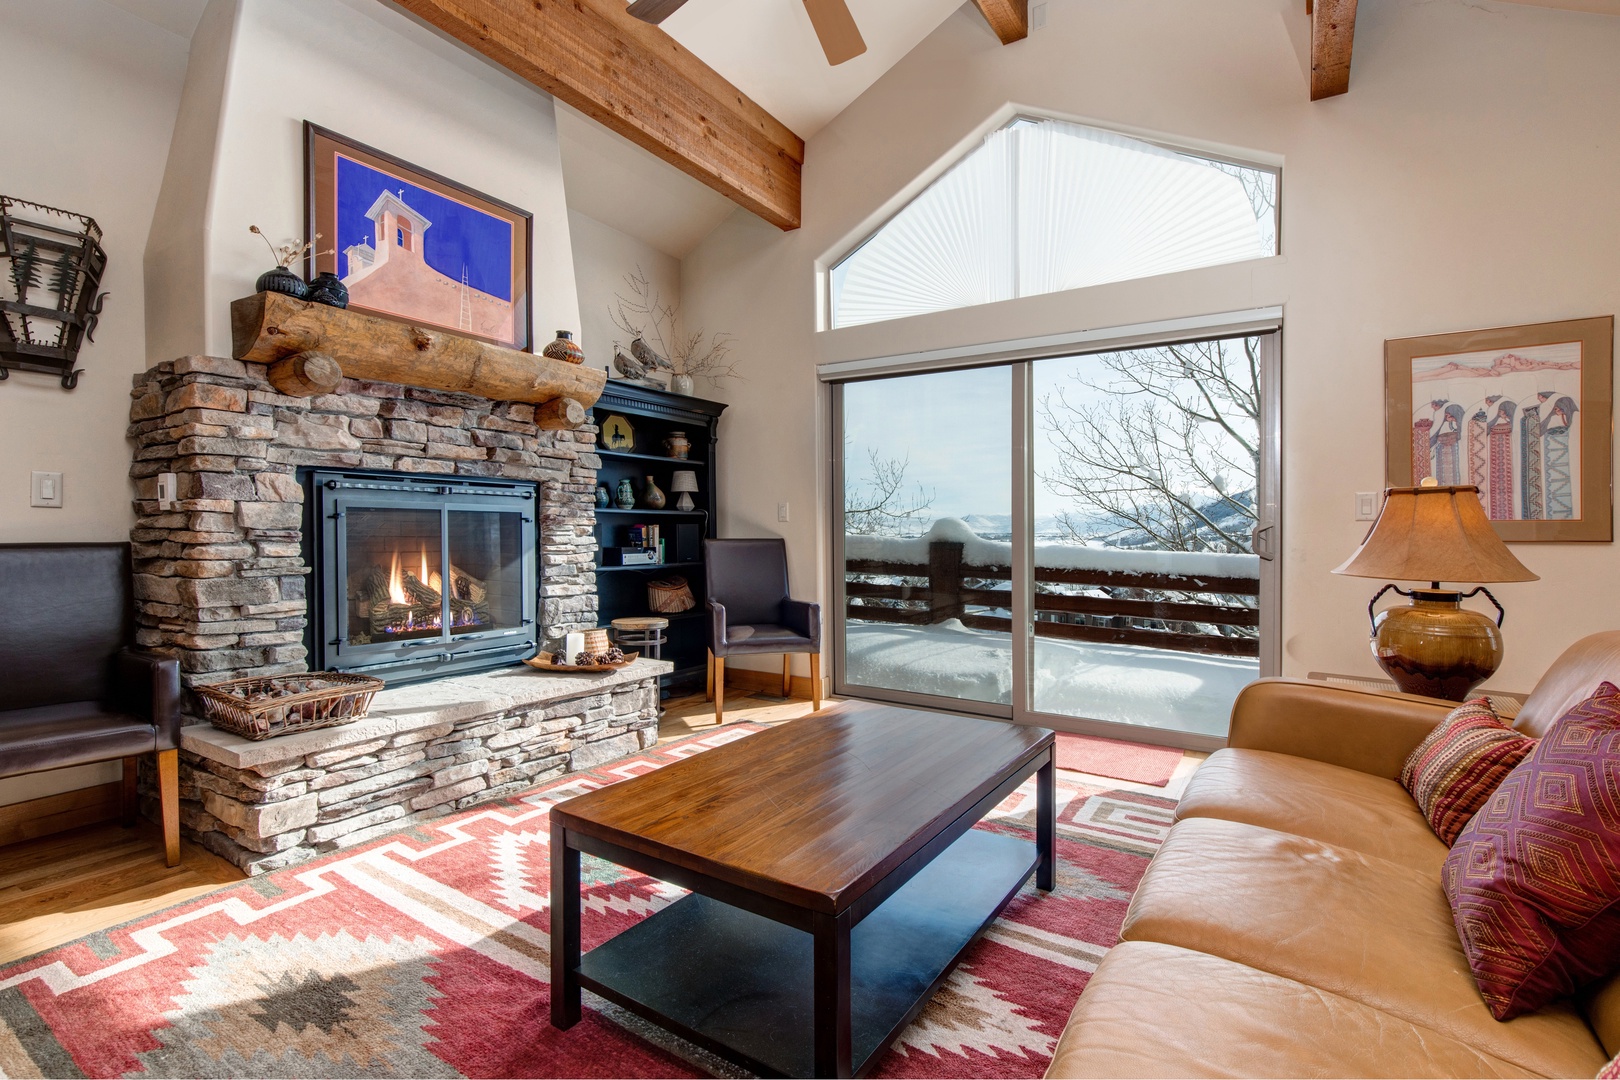 Park City Vacation Rentals, Cedar Ridge Townhouse - Distressed timber beams, vaulted ceilings, and patterned rugs add character to the cozy living space, while a bubbling hot tub awaits on a private deck.